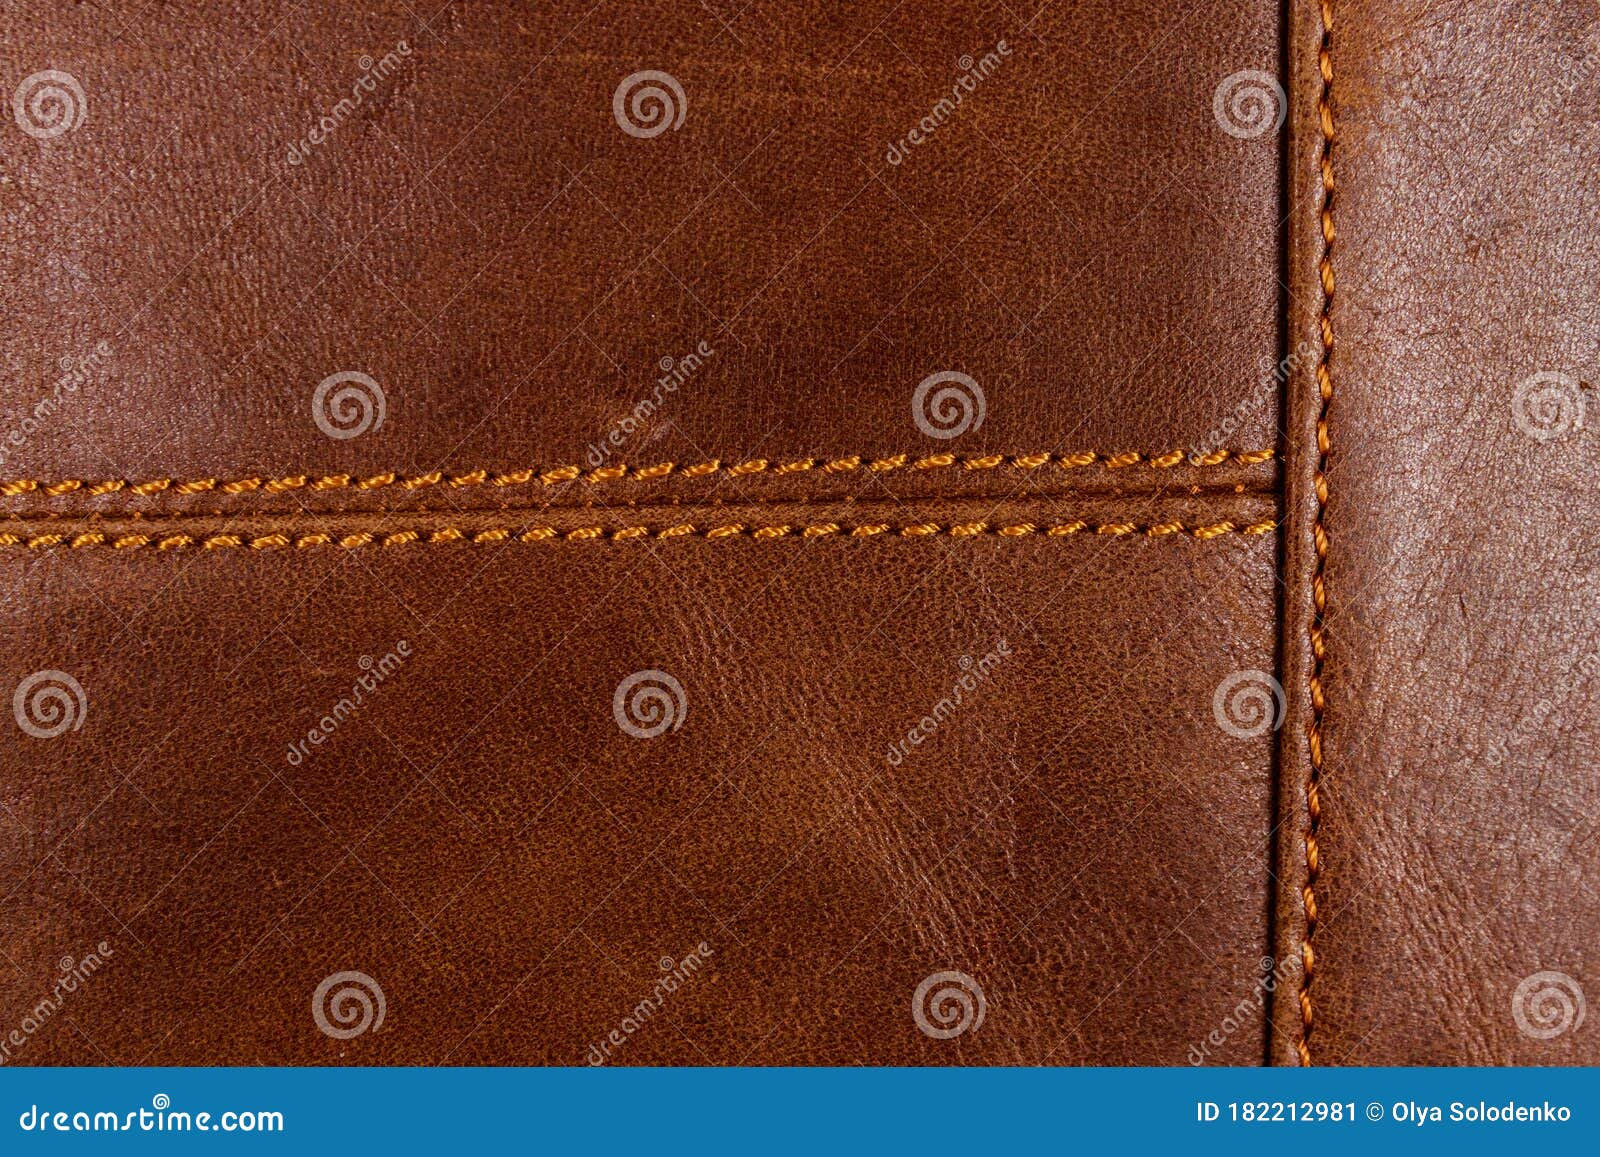 Brown Leather Texture Background Stock Image - Image of accessory ...